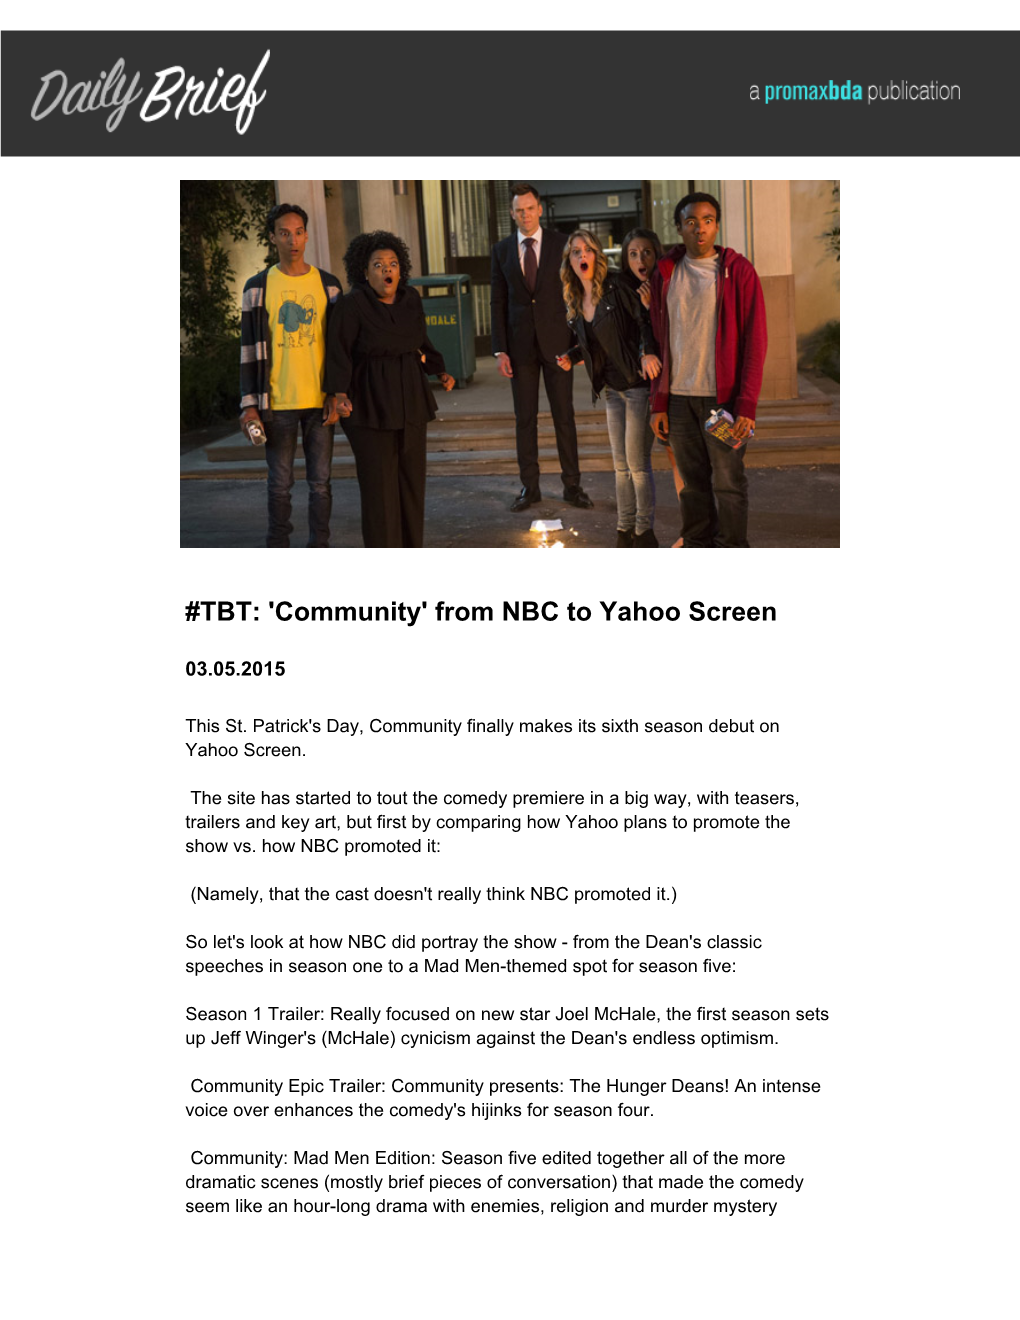 From NBC to Yahoo Screen